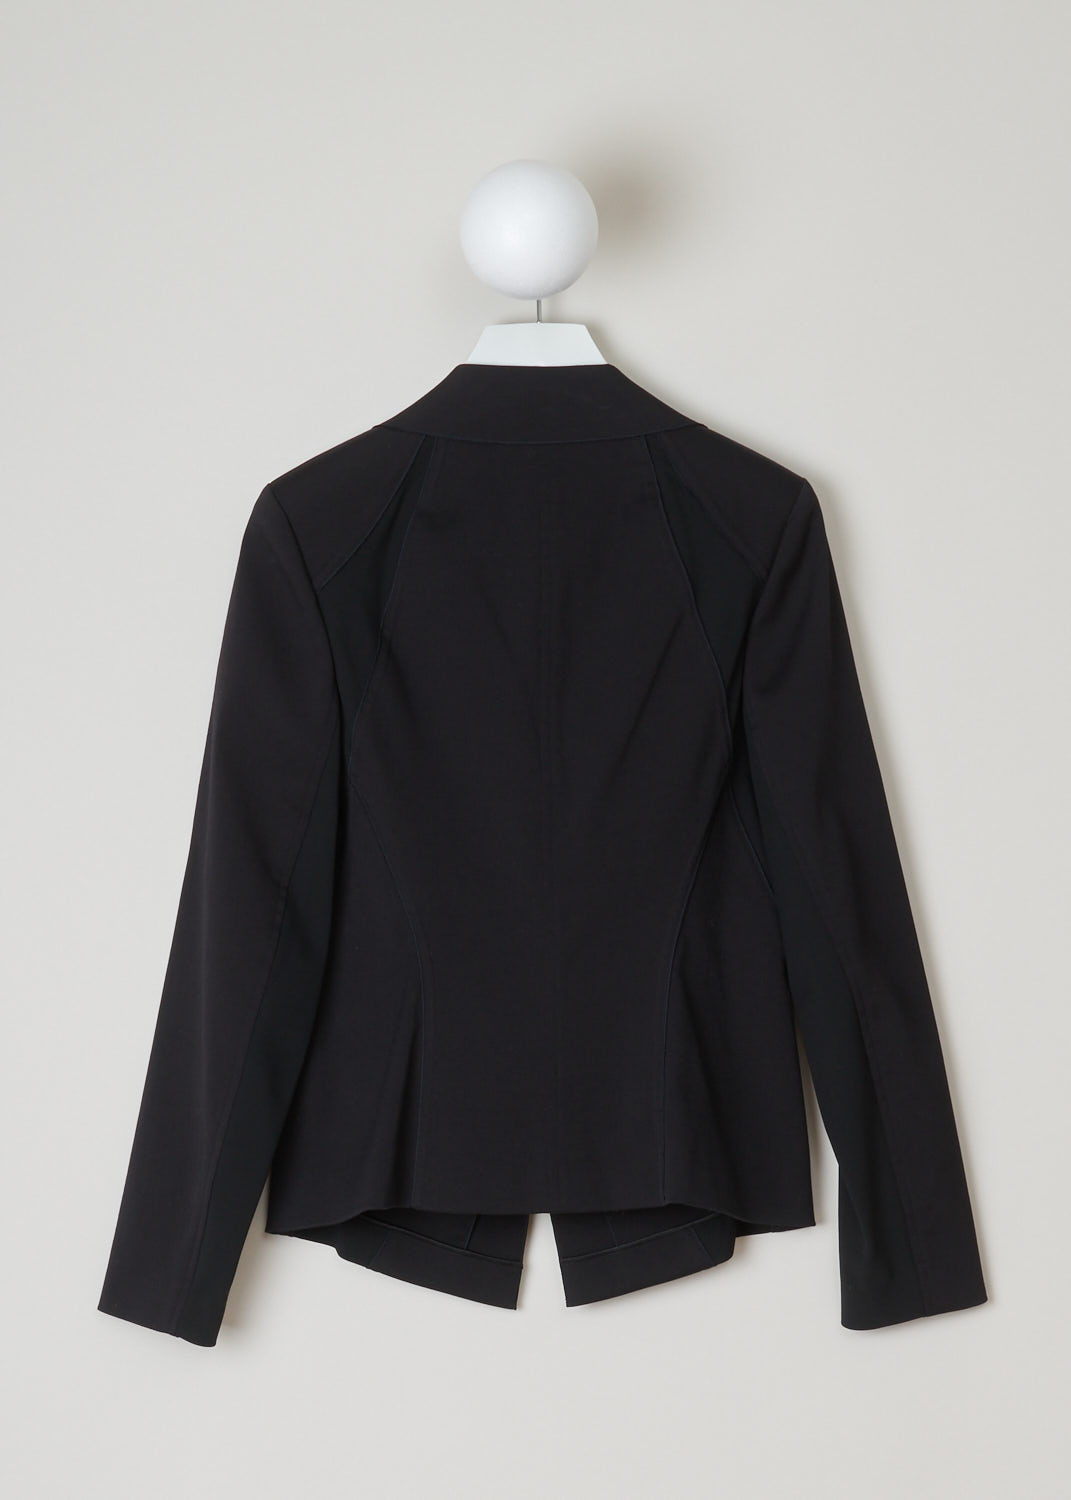 Donna Karan, black double lapel jacket, A42J238073_001_black, black, back, Black jacket comes with a pointed collar and double lapels. Featuring long sleeves and has backing buttons on the front as your closure option. This jacket is made up from two kinds of fabrics a stretchy kind and a regular kind, and placed in a certain way where the jacket stretches where needed. 